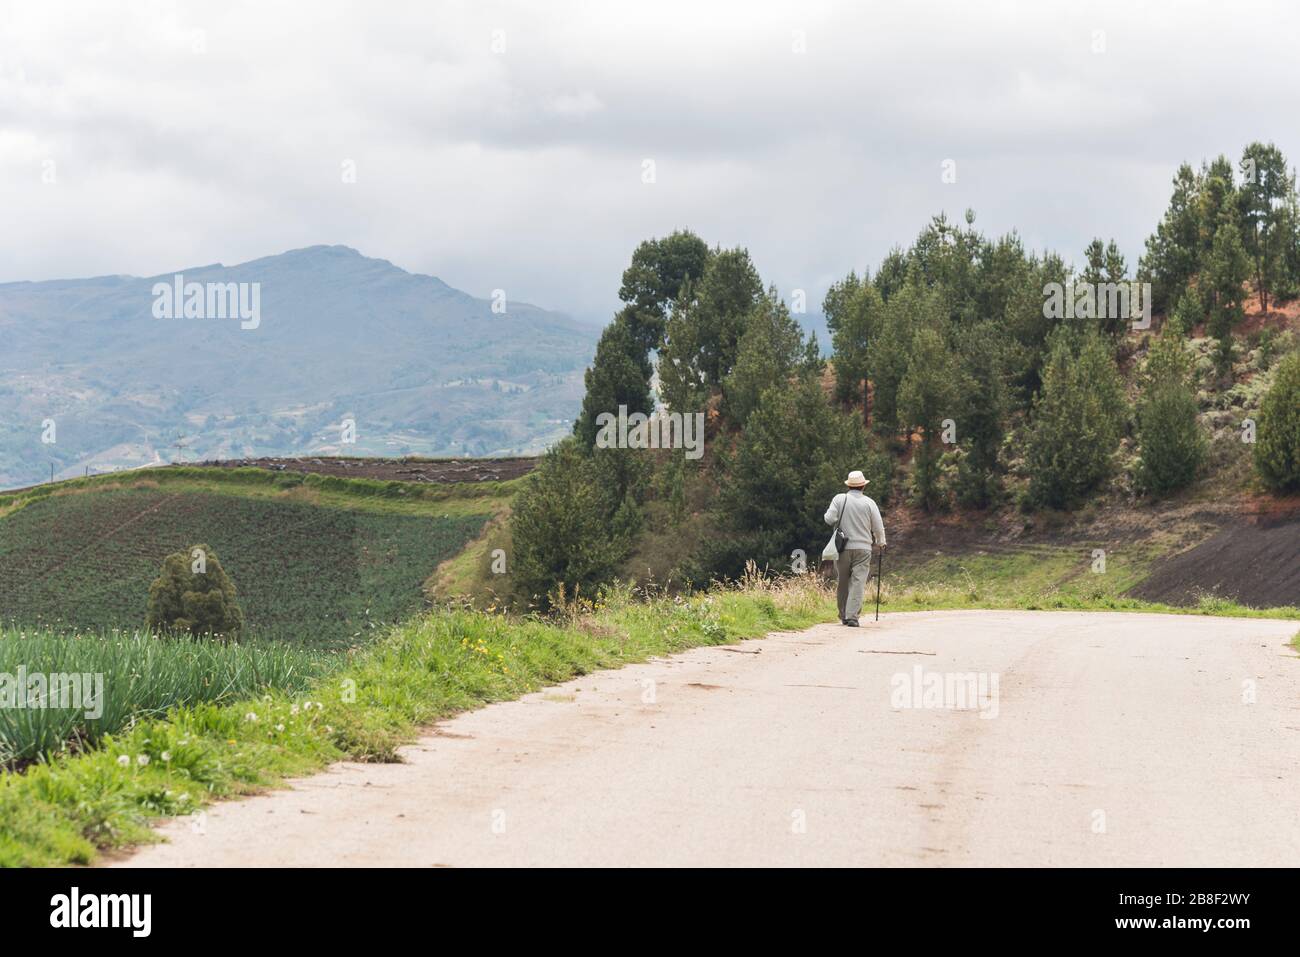 Aquitania, Boyaca / Colombia; April 8, 2018: man walking on a country road, in the middle of a green mountainous landscape, a cloudy day Stock Photo